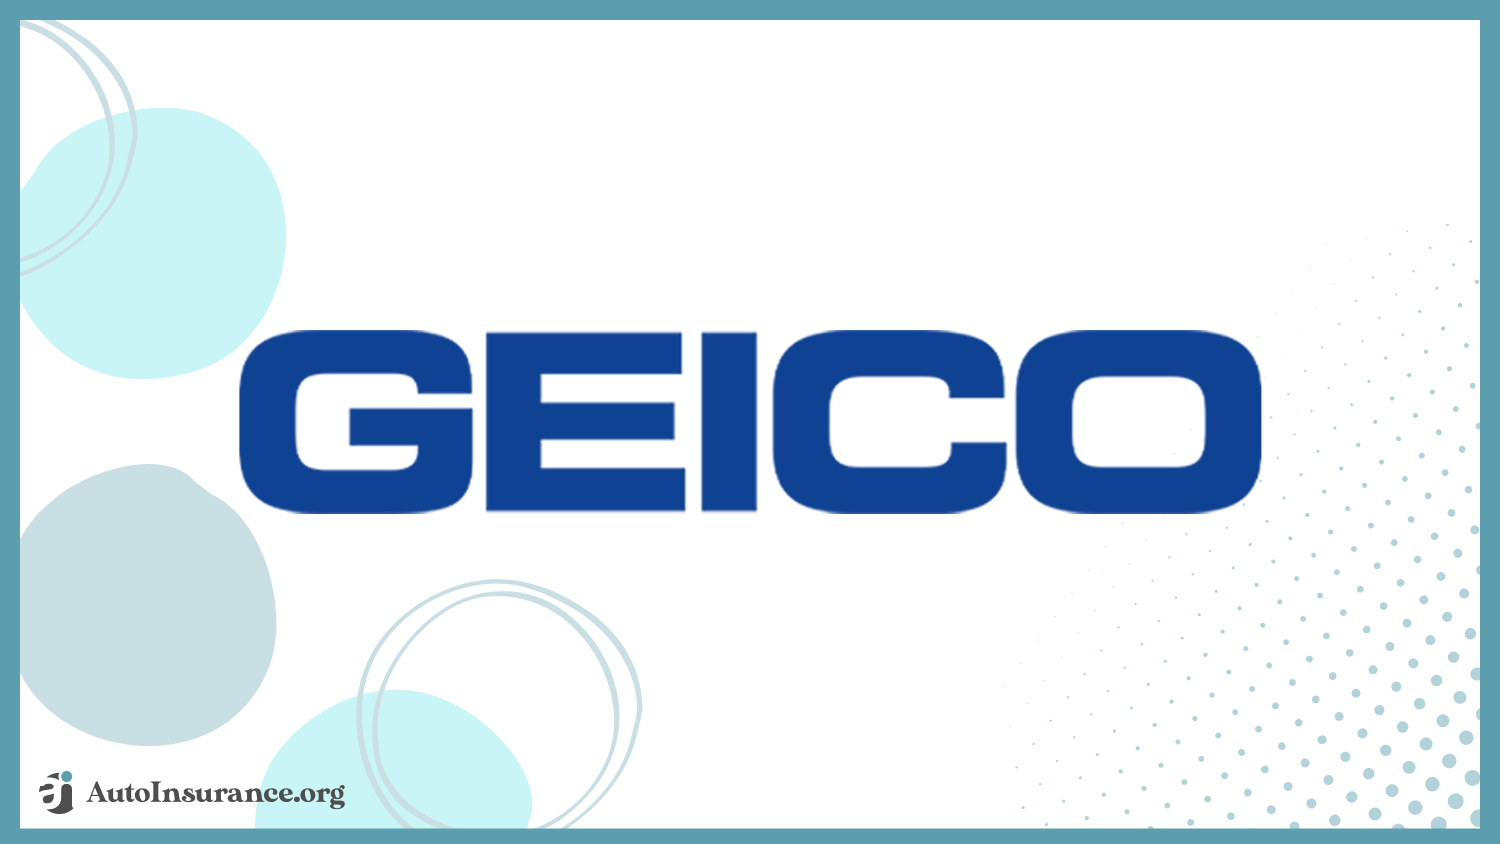 Geico: Best Auto Insurance Companies for High-Risk Drivers